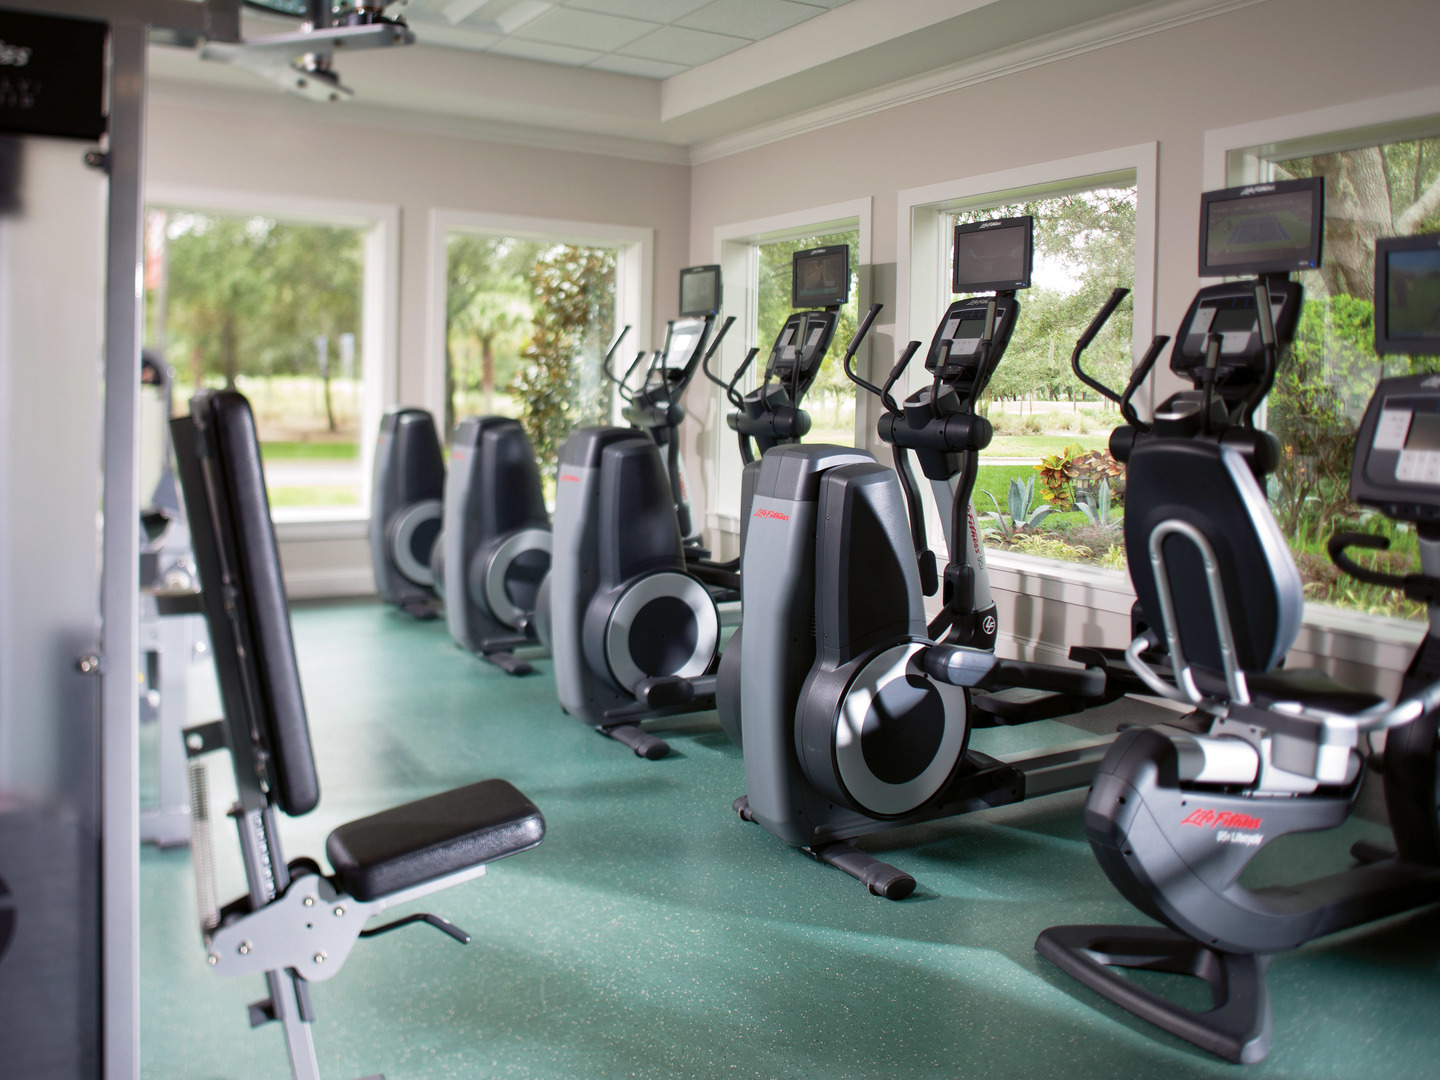 Marriott's Cypress Harbour Fitness Center. Marriott's Cypress Harbour is located in Orlando, Florida United States.